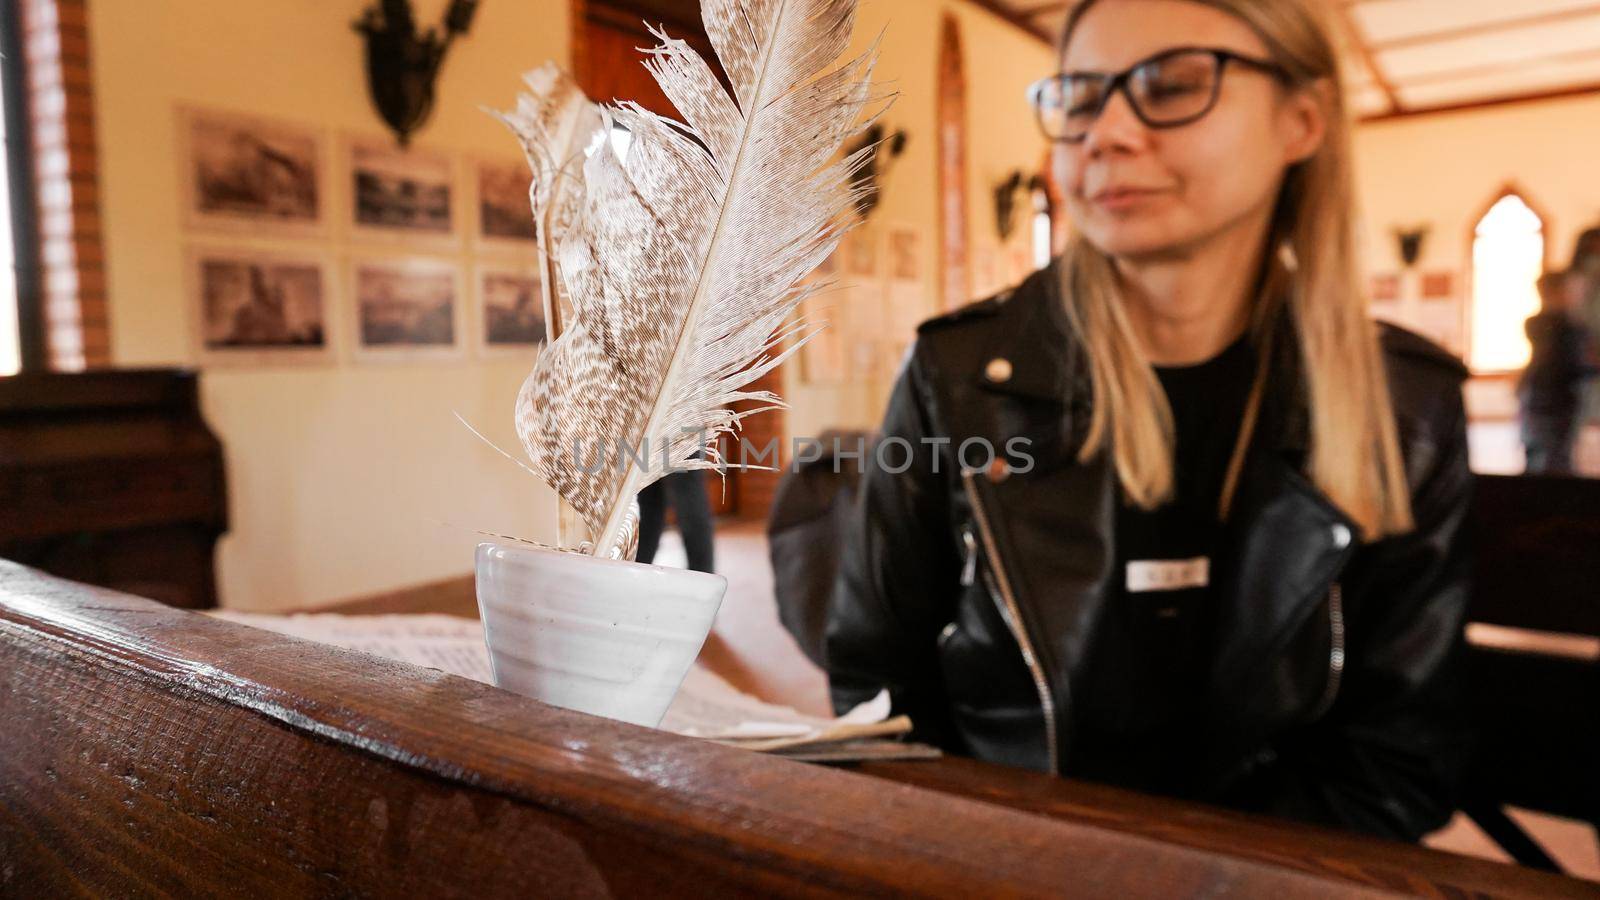 White quill and inkwell in the old university auditorium. Female student by natali_brill